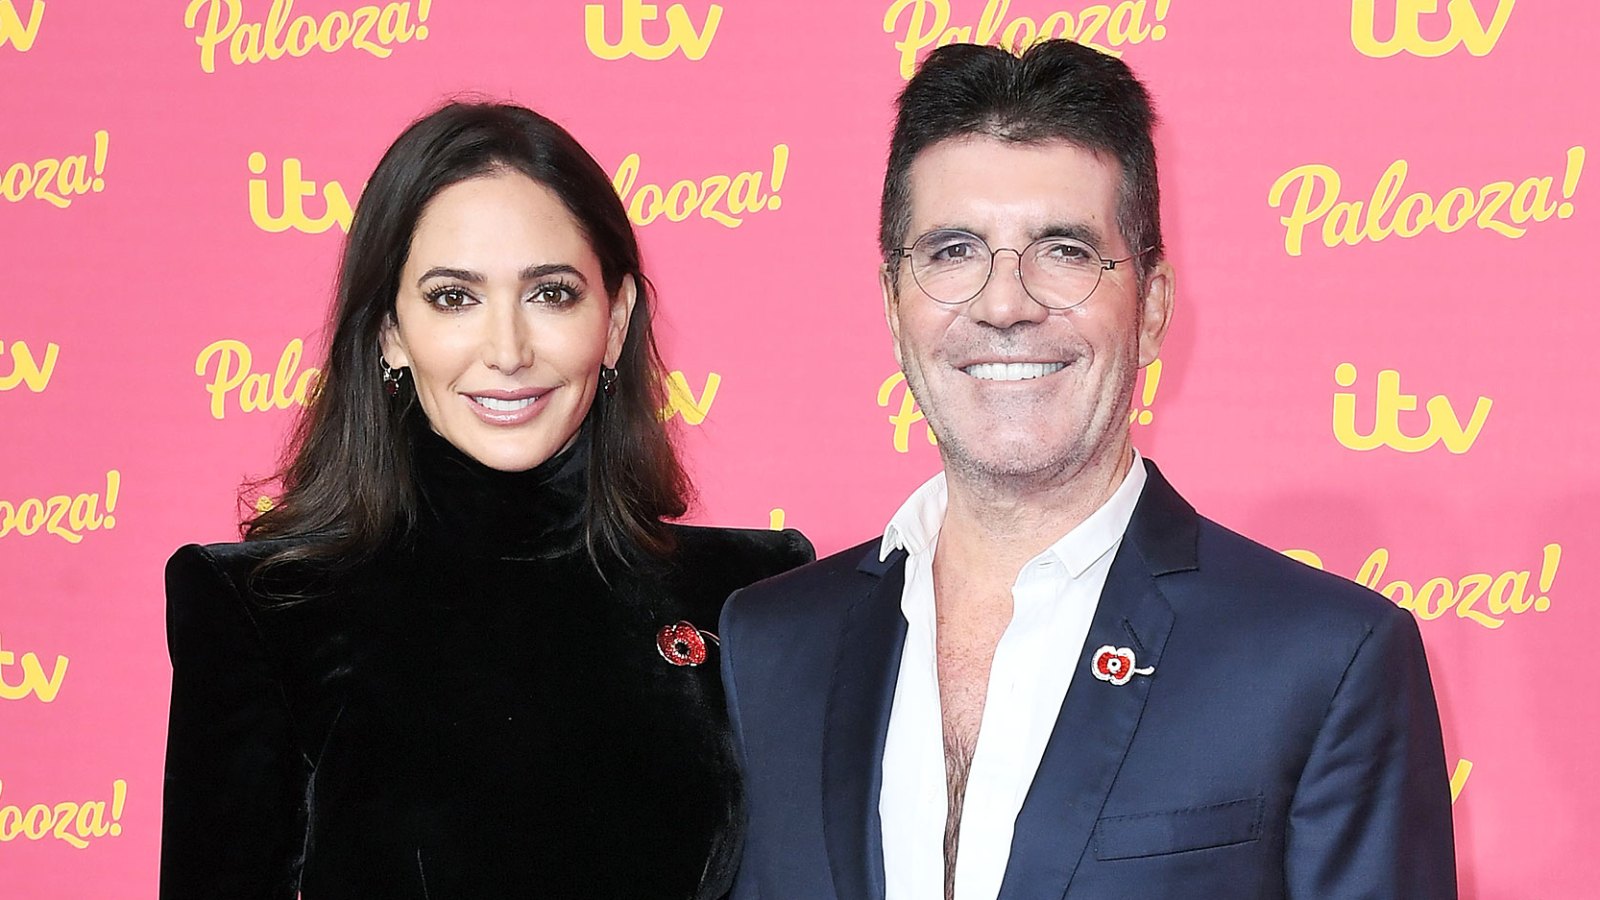 Simon Cowell Is in Good Spirits and Healing With Family After Back Injury